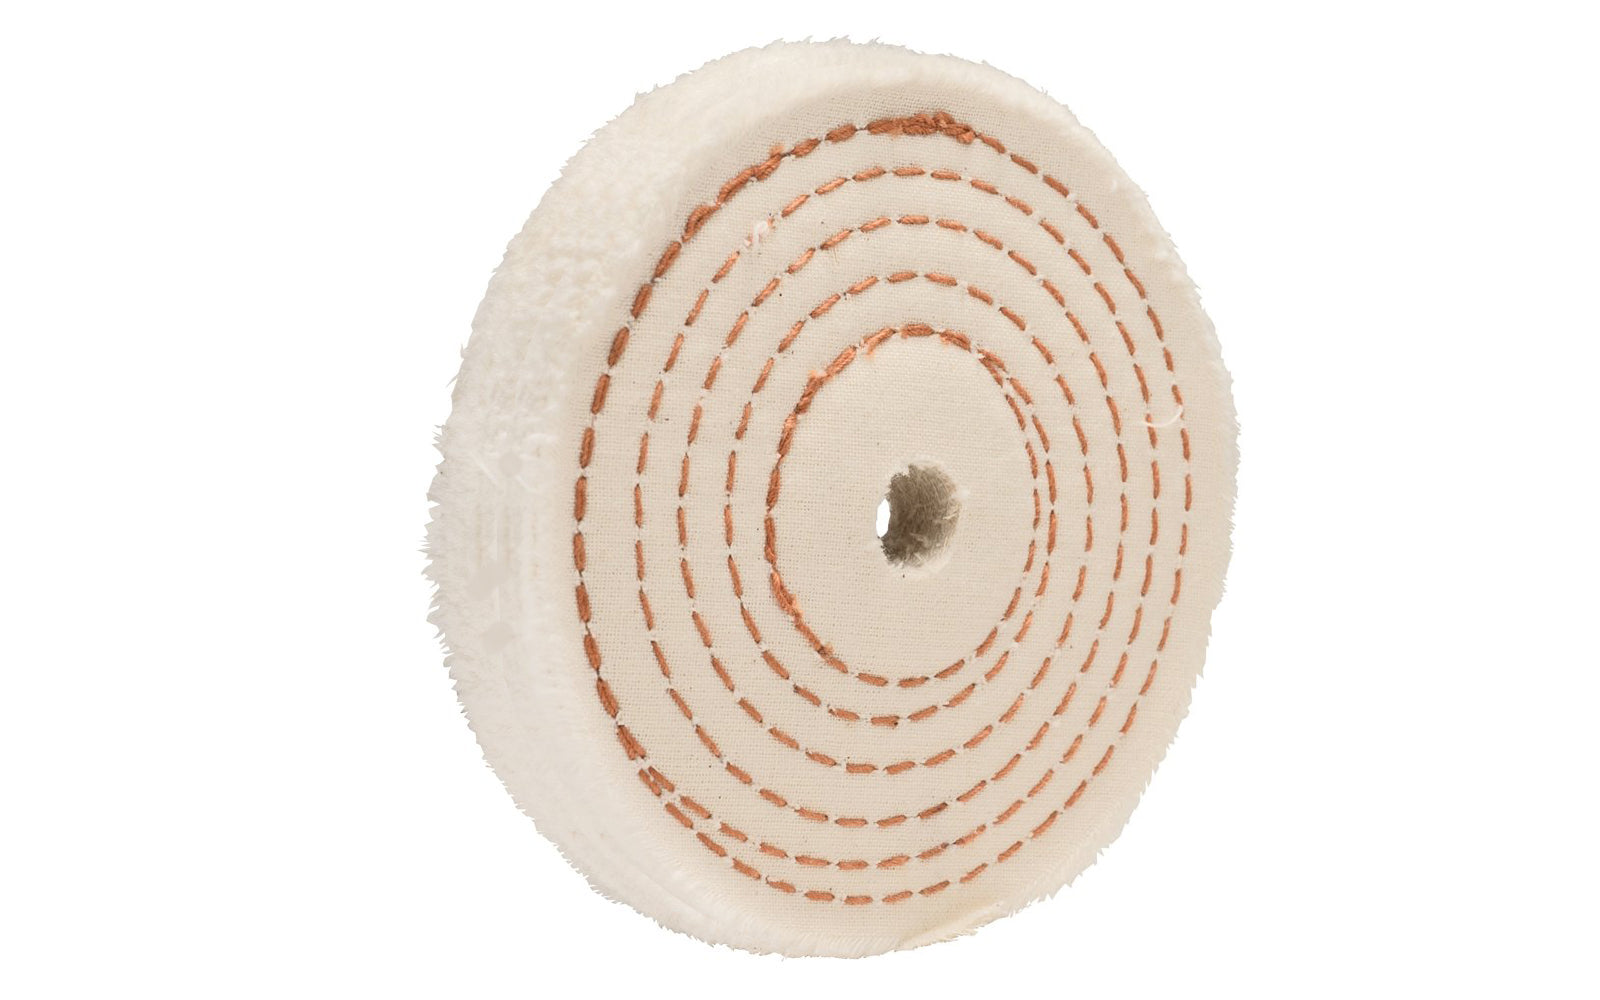 4" Spiral Sewn Buffing Wheel ~ 1" Thick is a workhorse for aggressive cutting & coarse buffing. 1/2" hole diameter. 1" wide thickness. Made in USA. spiral sewn wheel for prolong service. For coarse cutting & buffing, & flexible grinding. Stiffer cotton sheeting held together with 1/4" wide spiral sewn lockstitch sewing